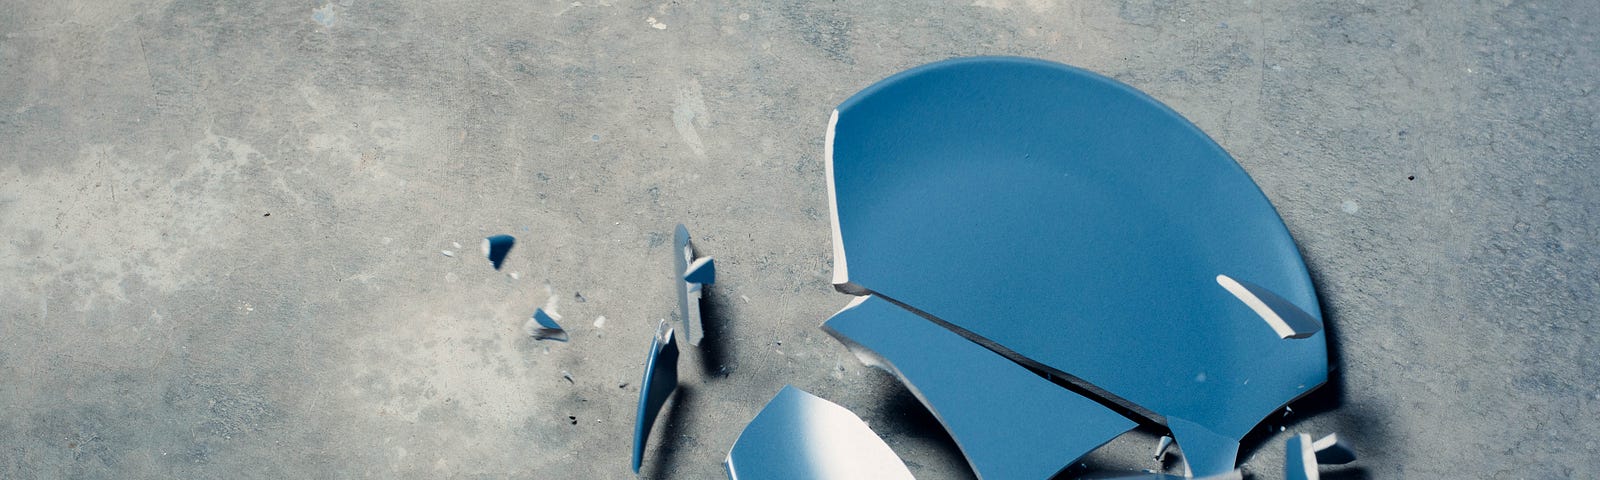 Image of a blue plate smashed on the floor for article titled “What If You Can’t Fix Yourself” on The Reflectionist